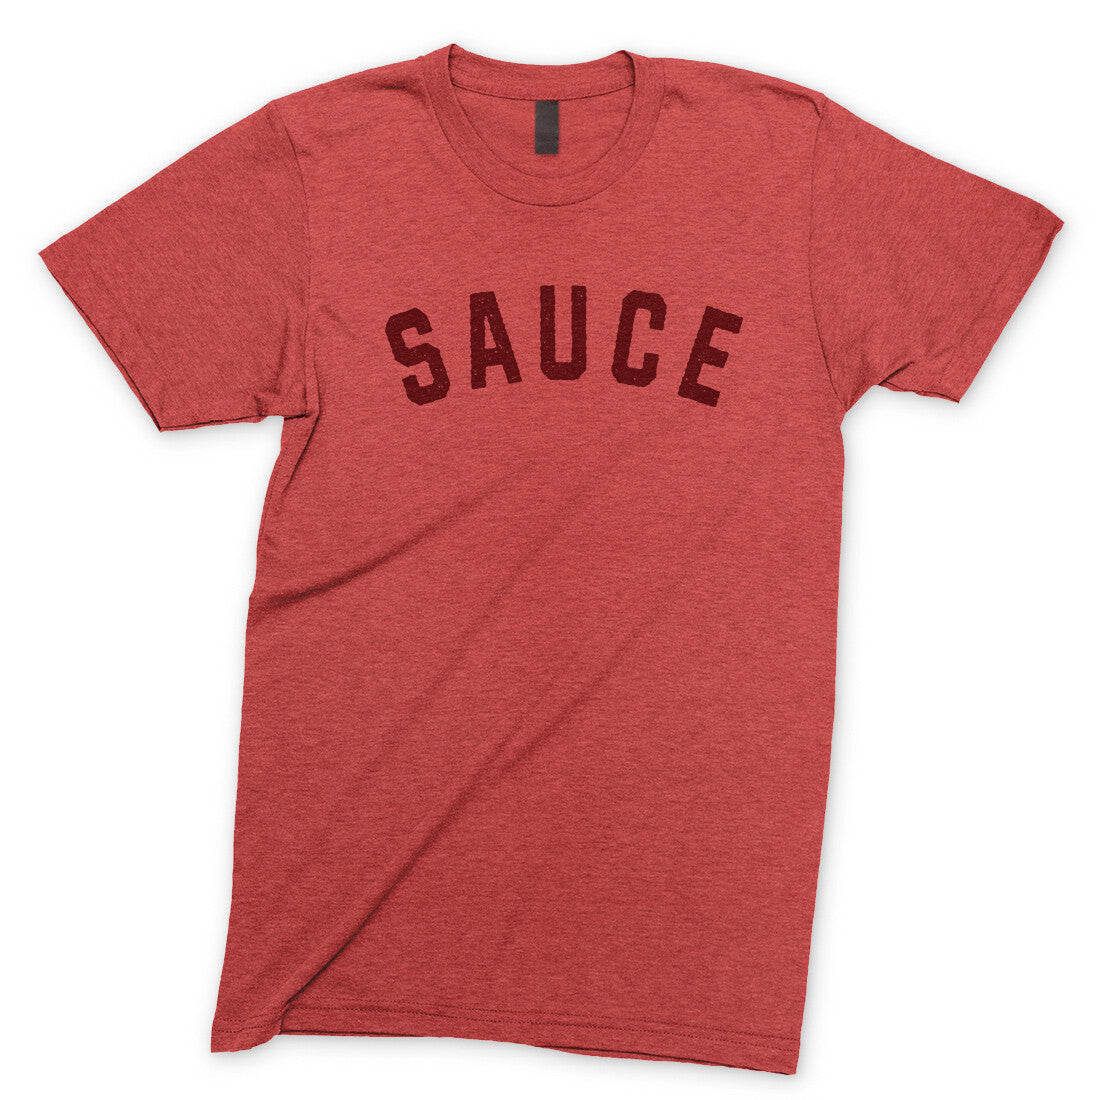 Sauce in Heather Red Color